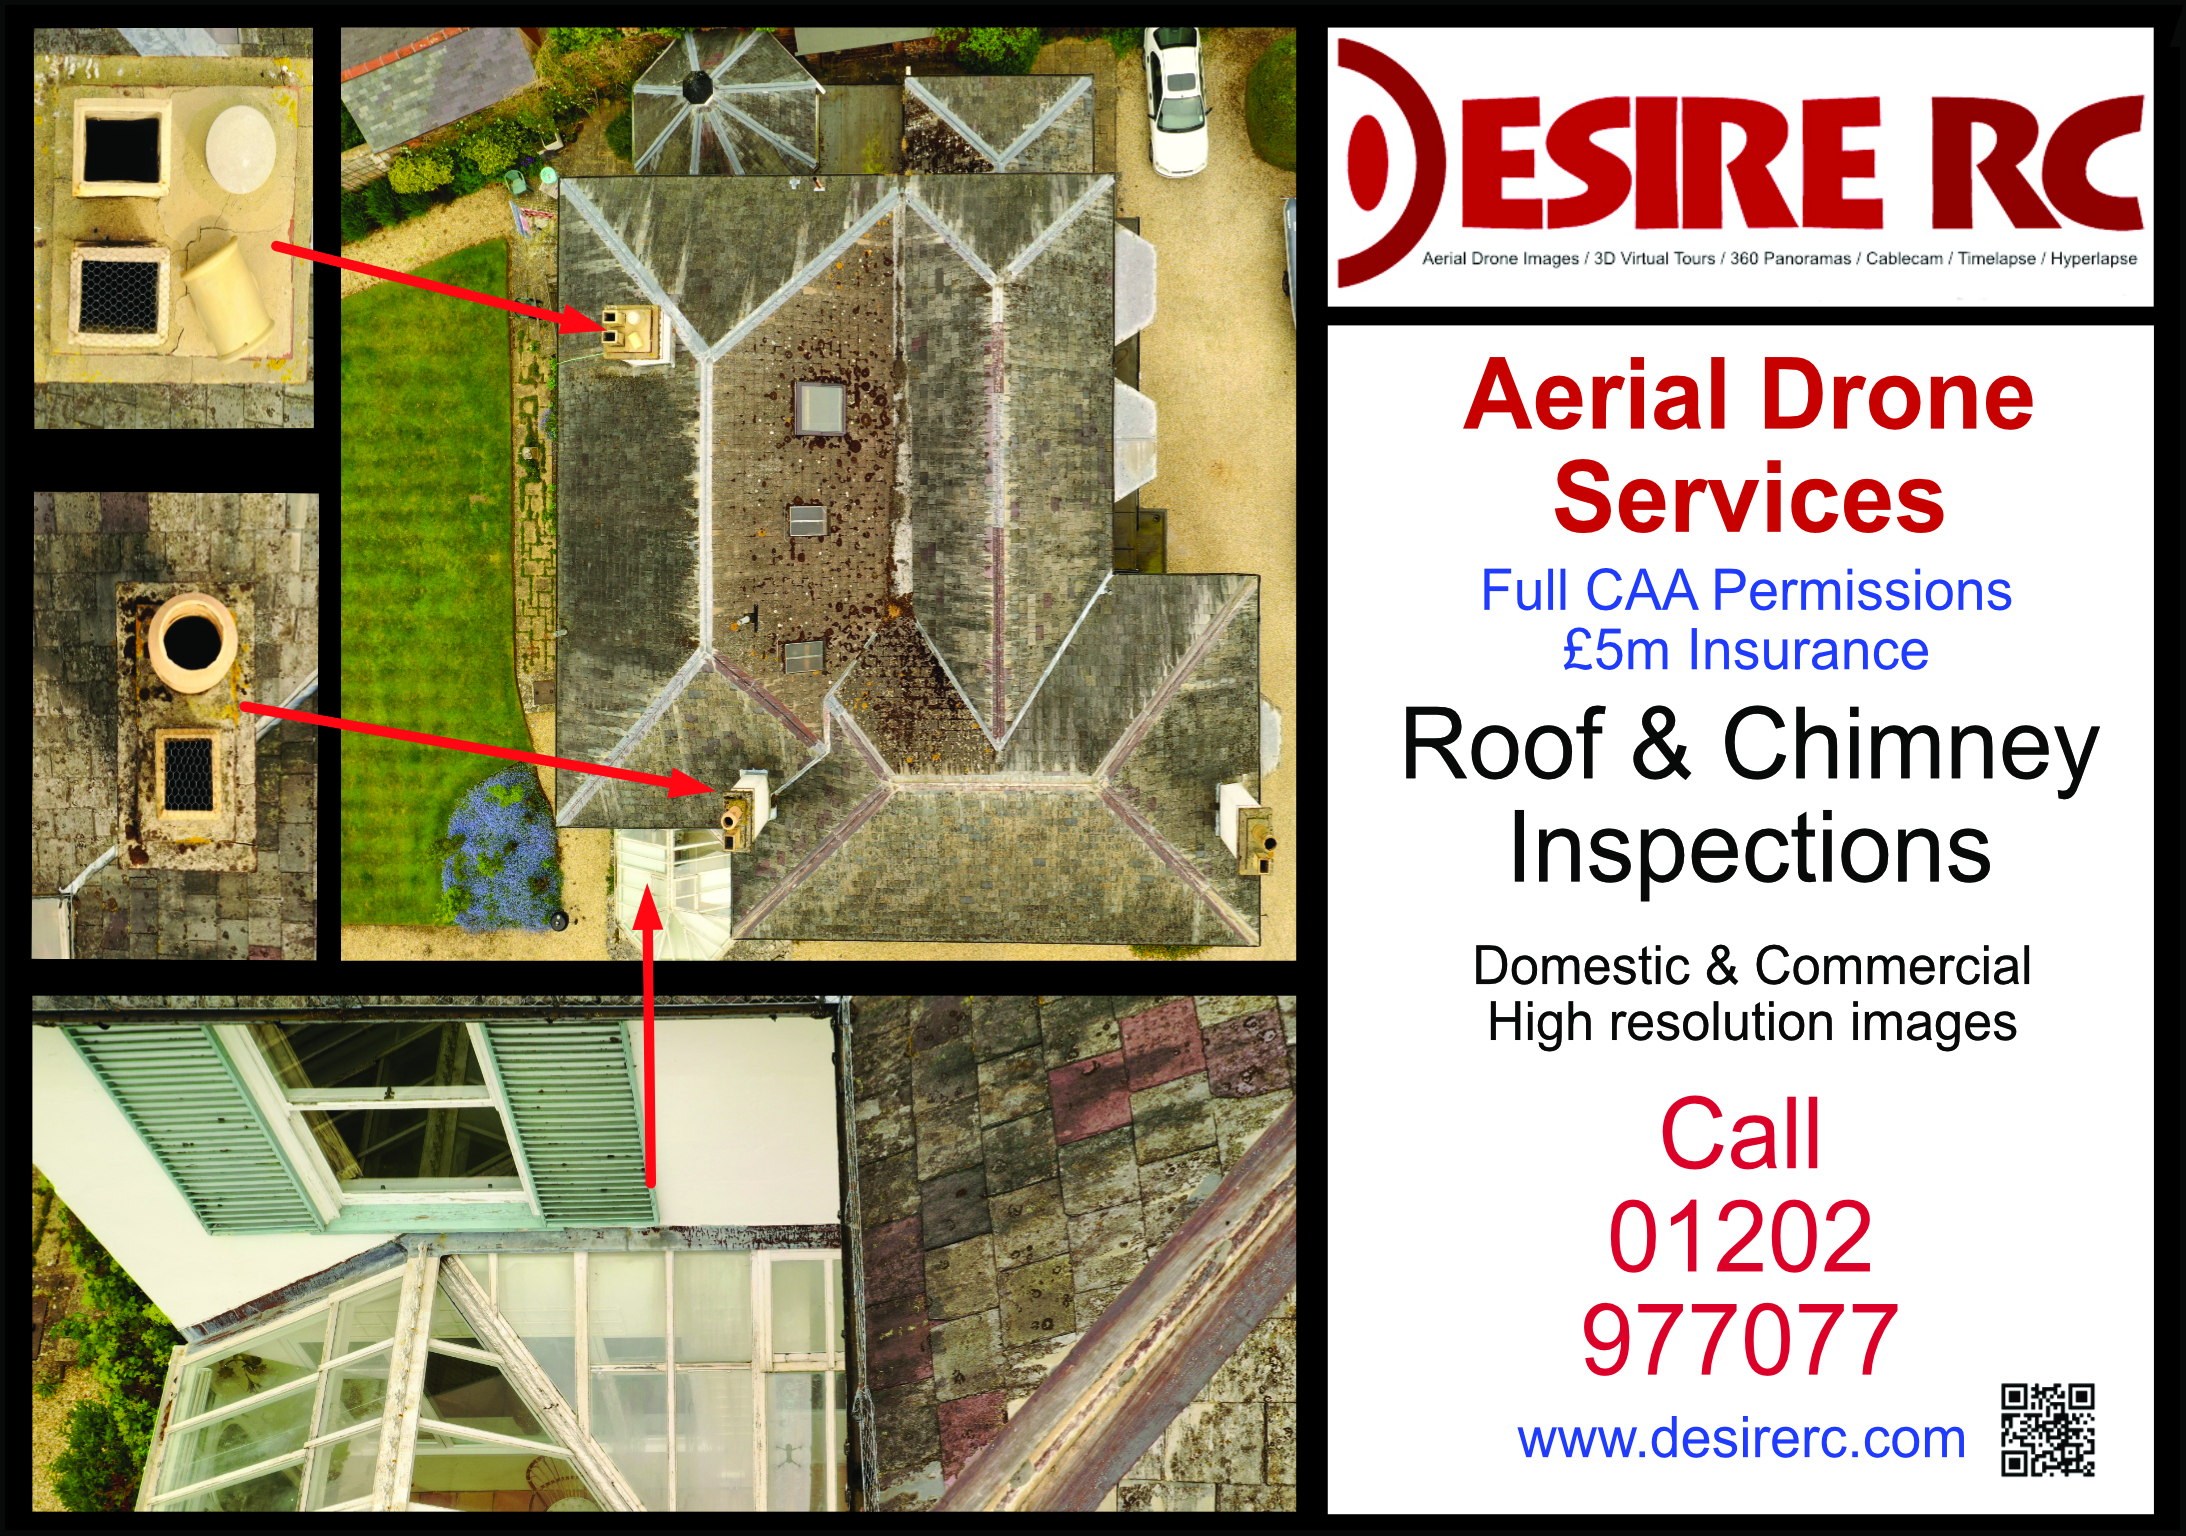 Do you need a roof survey, or are you a professional surveyor that needs to add this to your portfolio? Call us now!